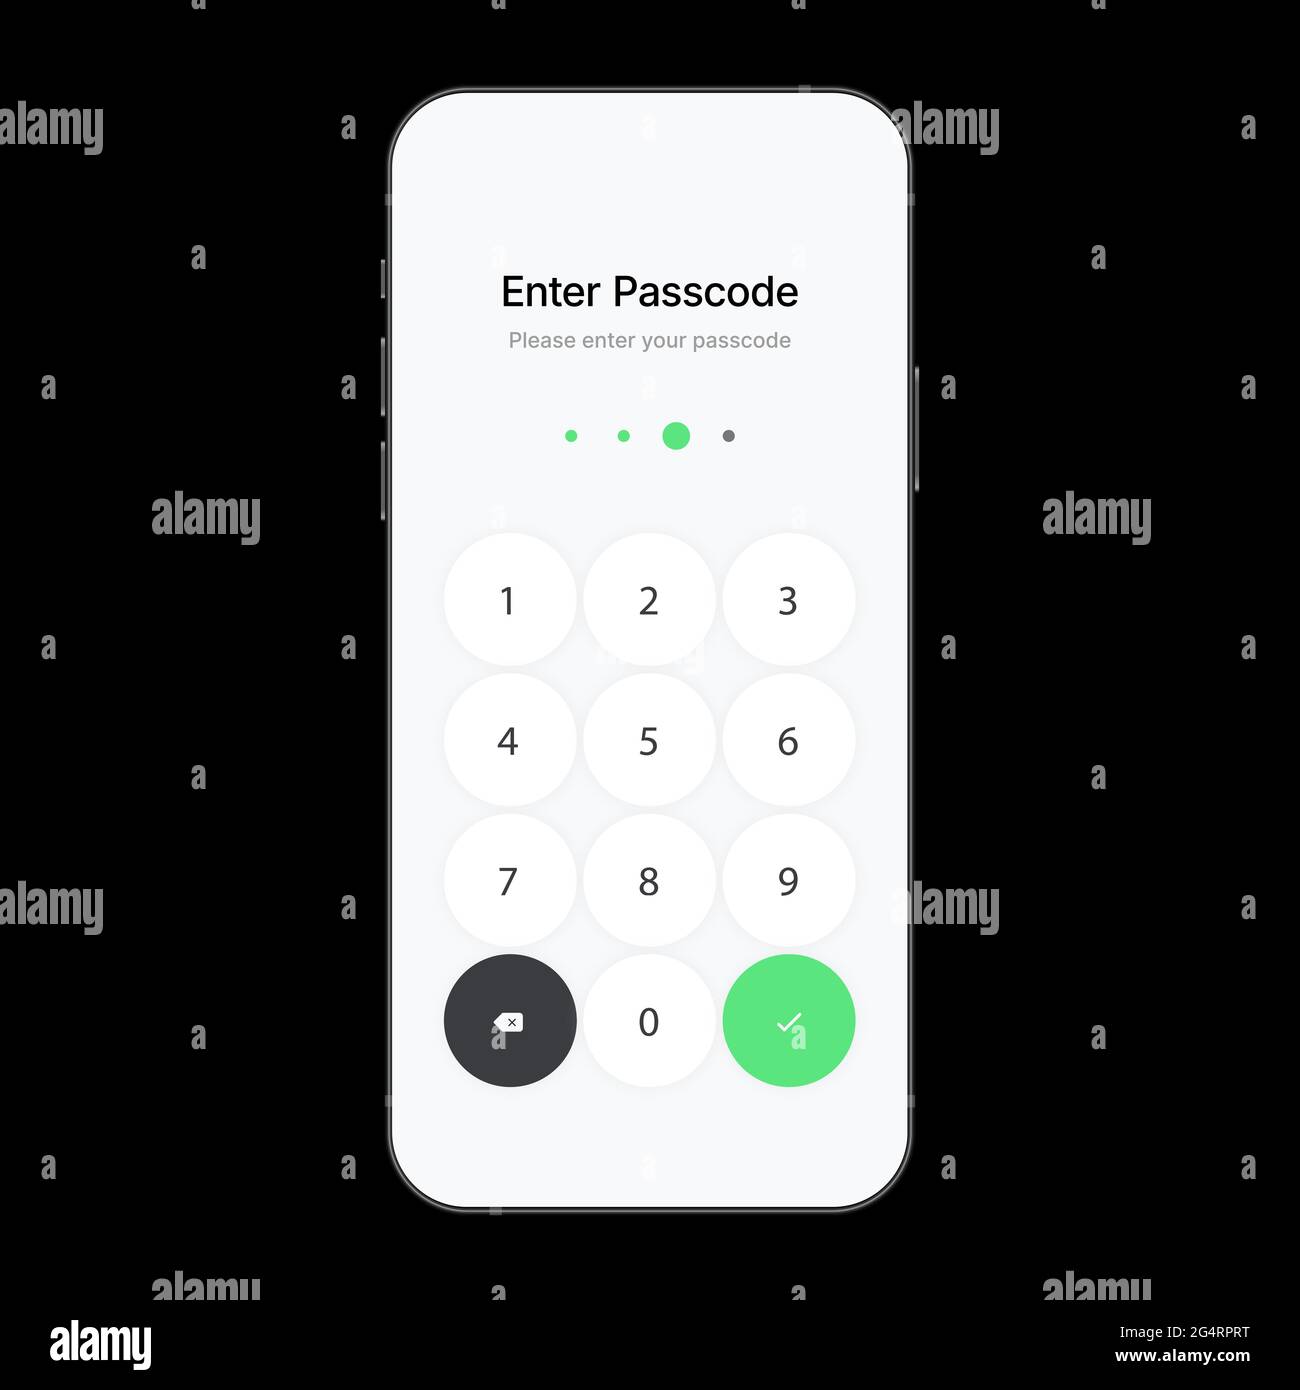 Simple Passcode Interface. Clean and Bright Template. Enter your Password. Vector illustration Stock Vector